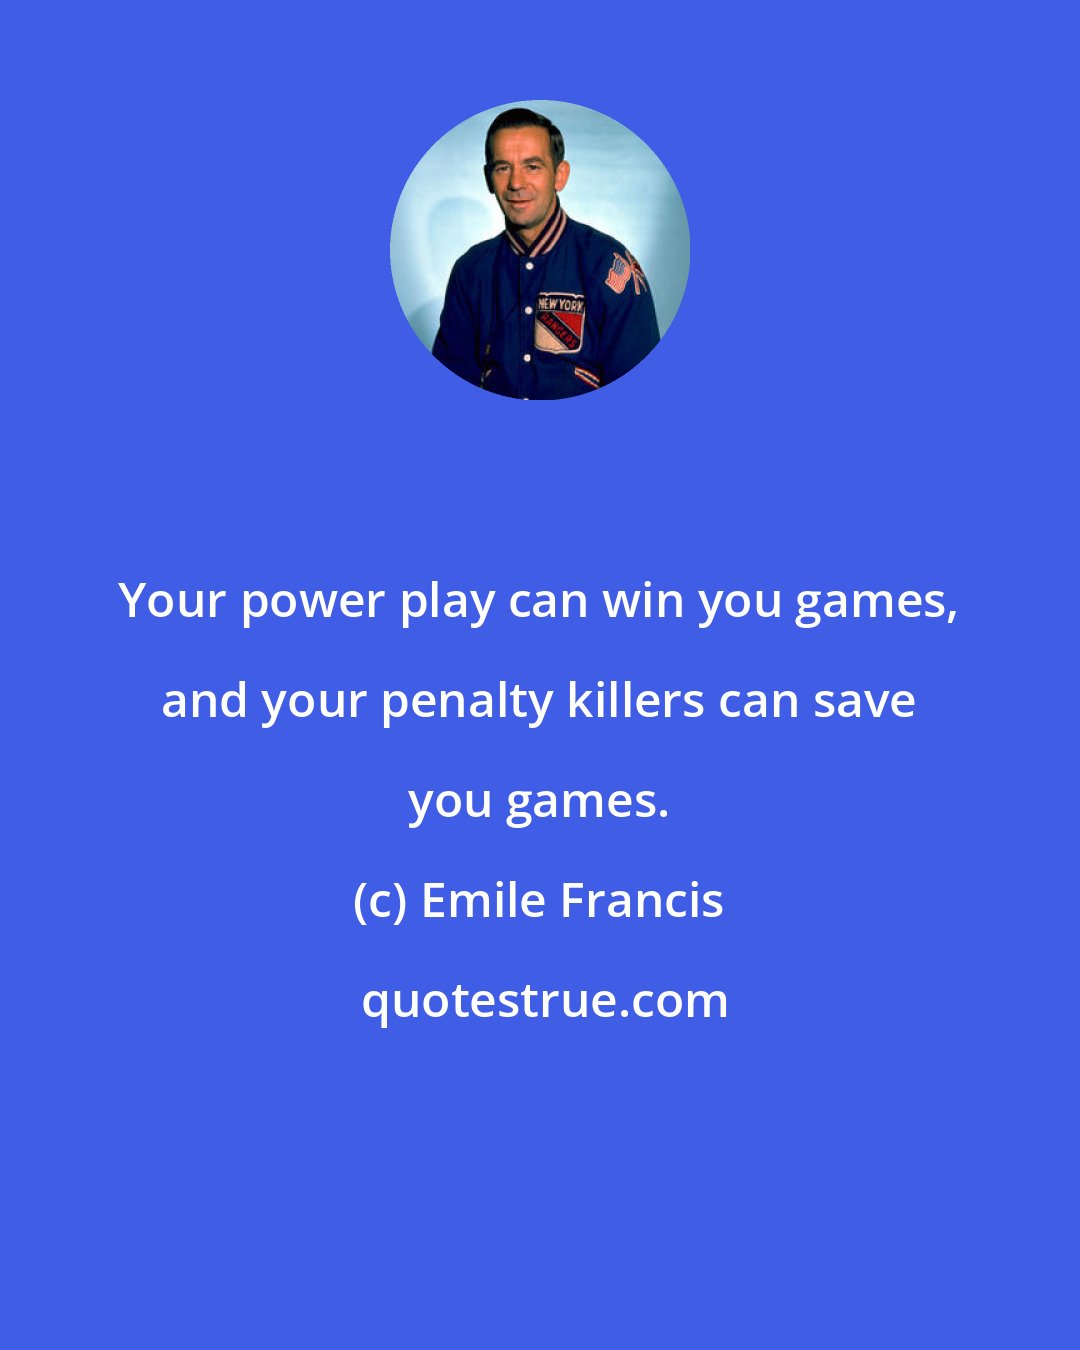 Emile Francis: Your power play can win you games, and your penalty killers can save you games.